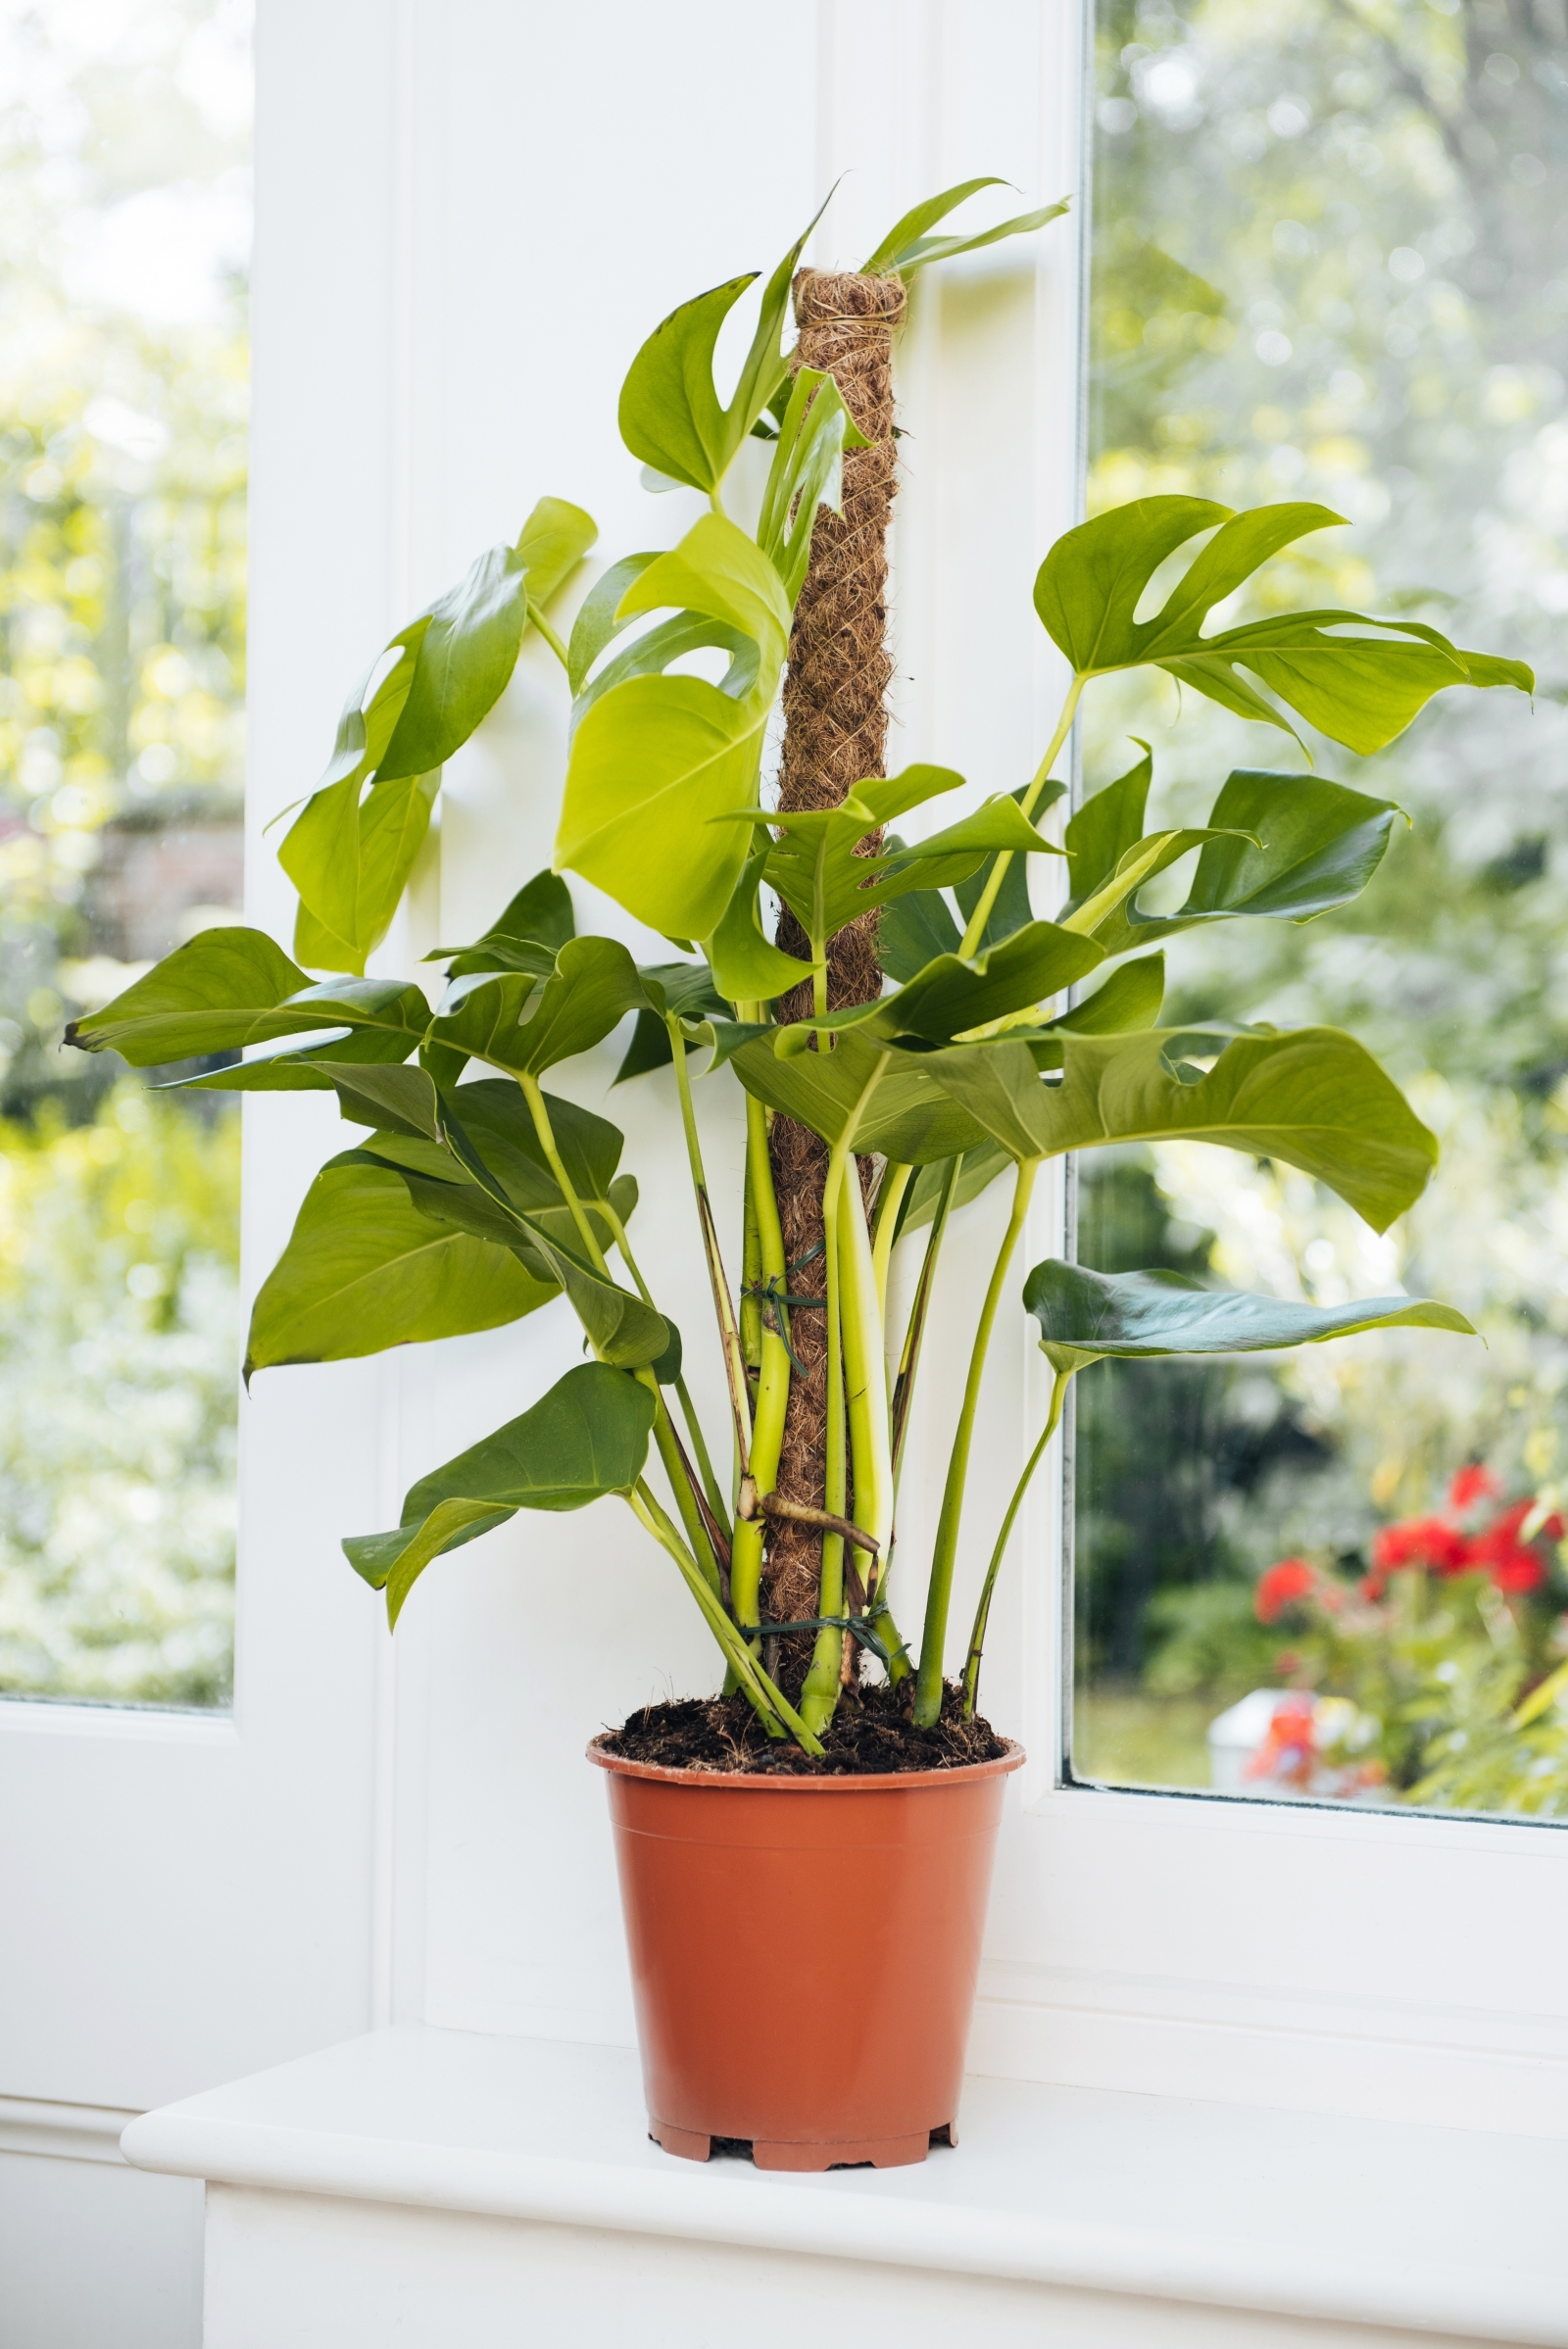 The trendiest house plants for 2018